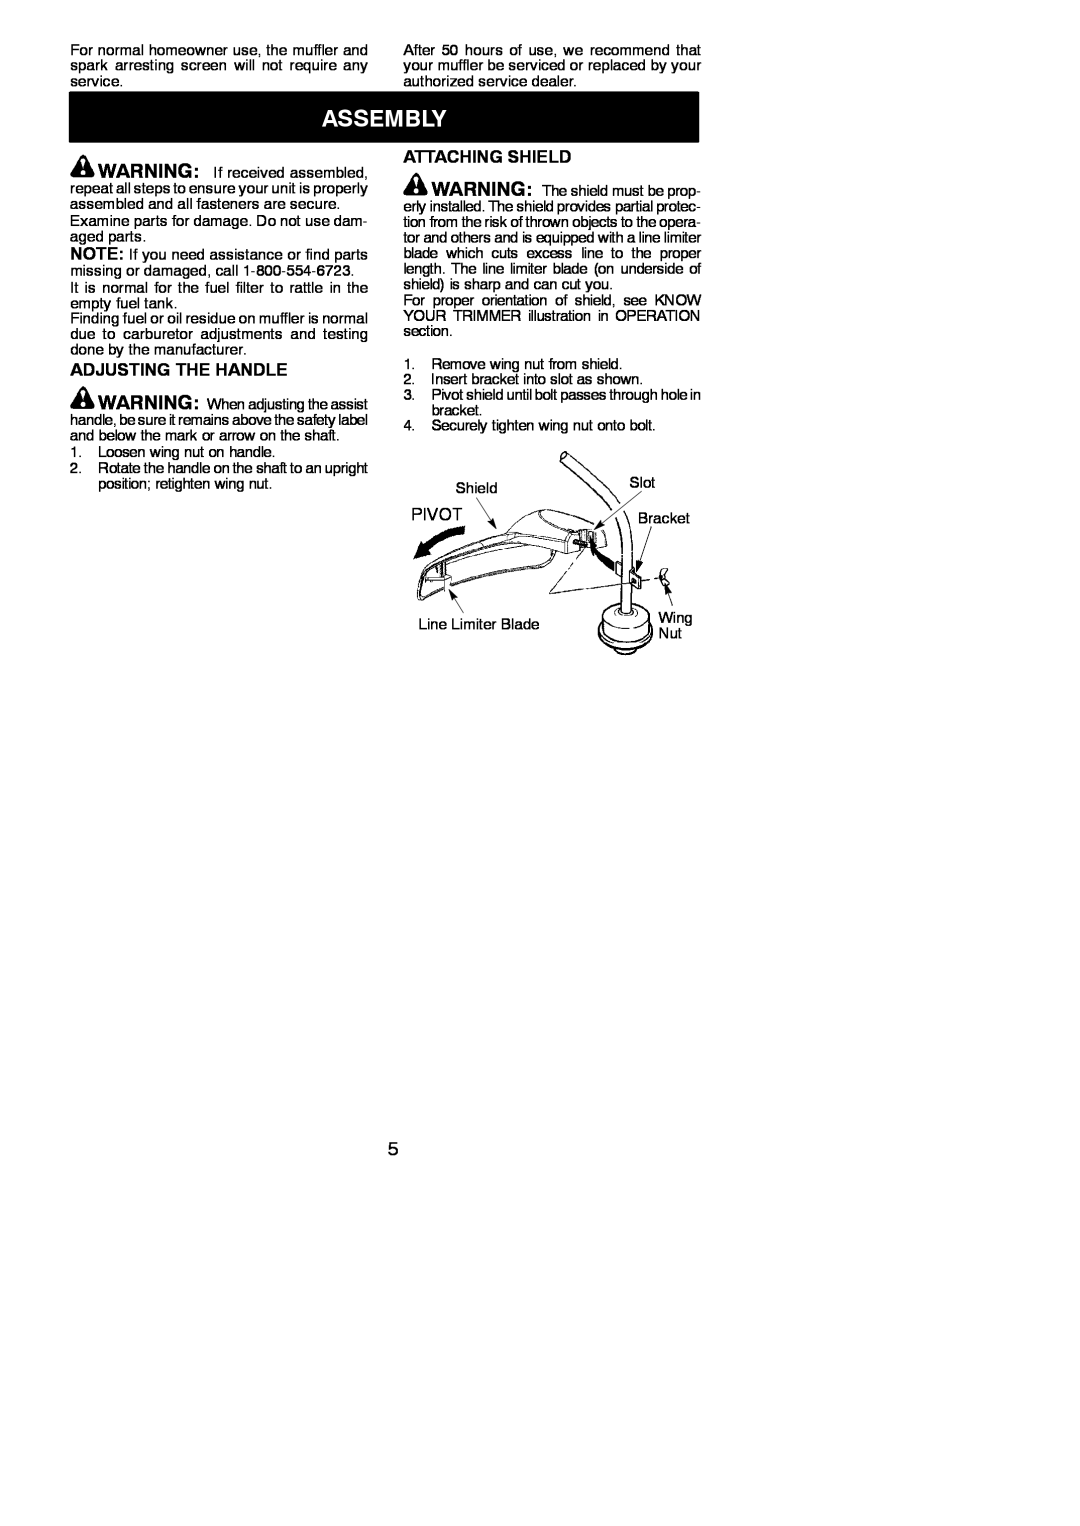 Weed Eater 545186837, FL23 instruction manual Assembly, Adjusting The Handle, Attaching Shield 